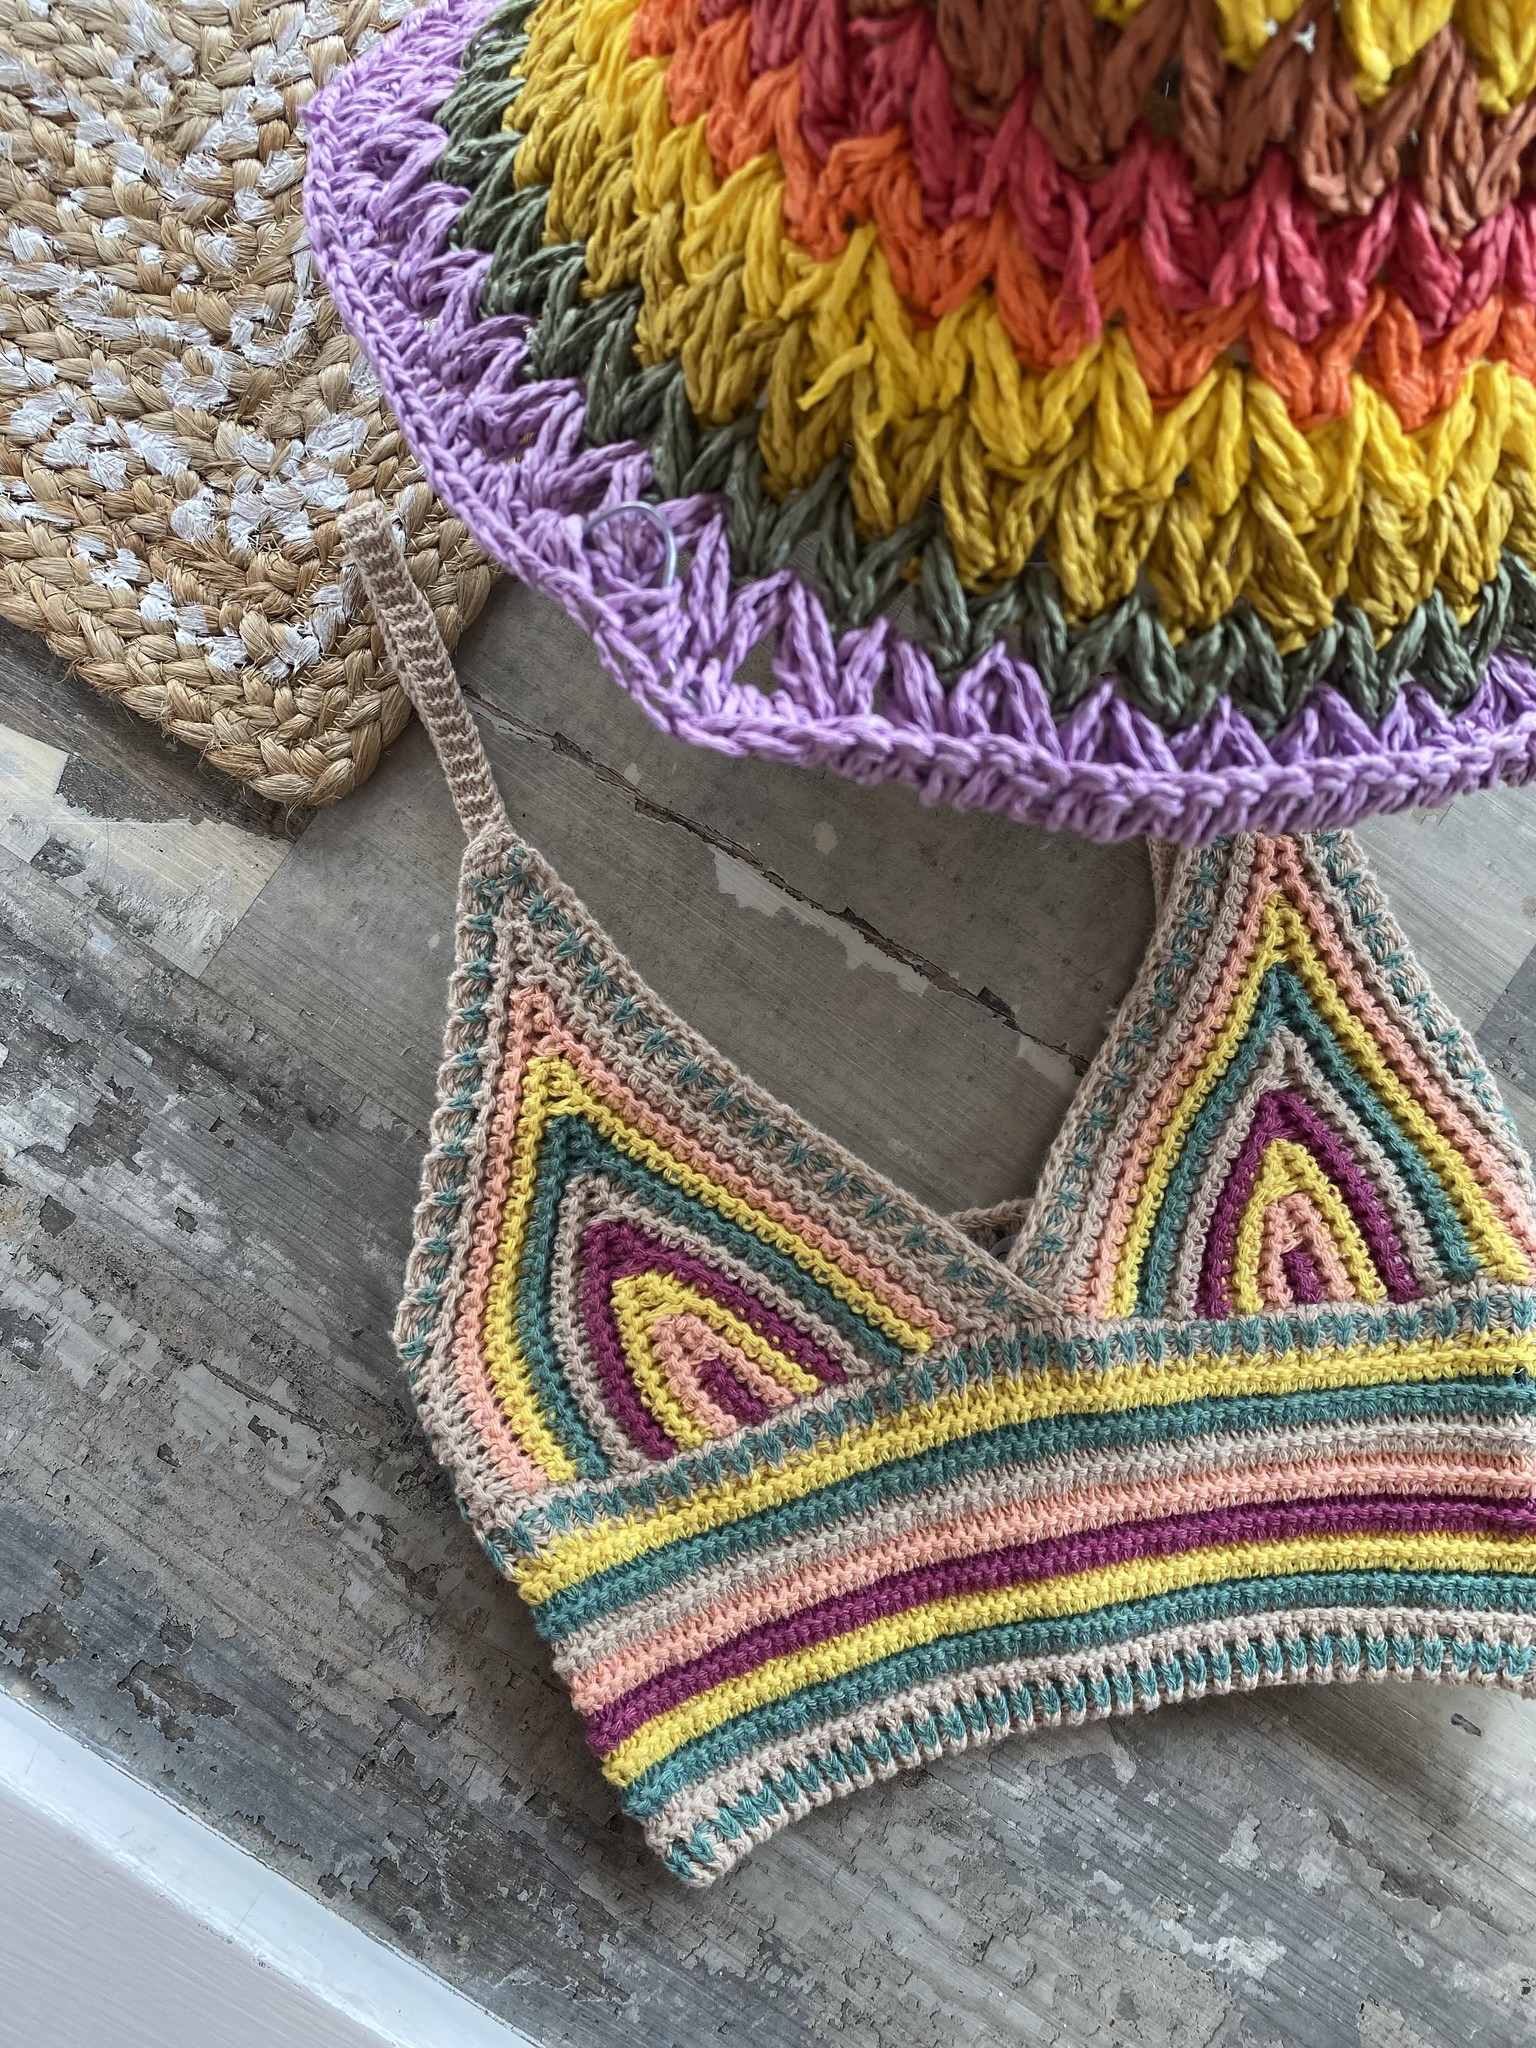 Colorful crochet bralette and hat featured againt gray marbled background